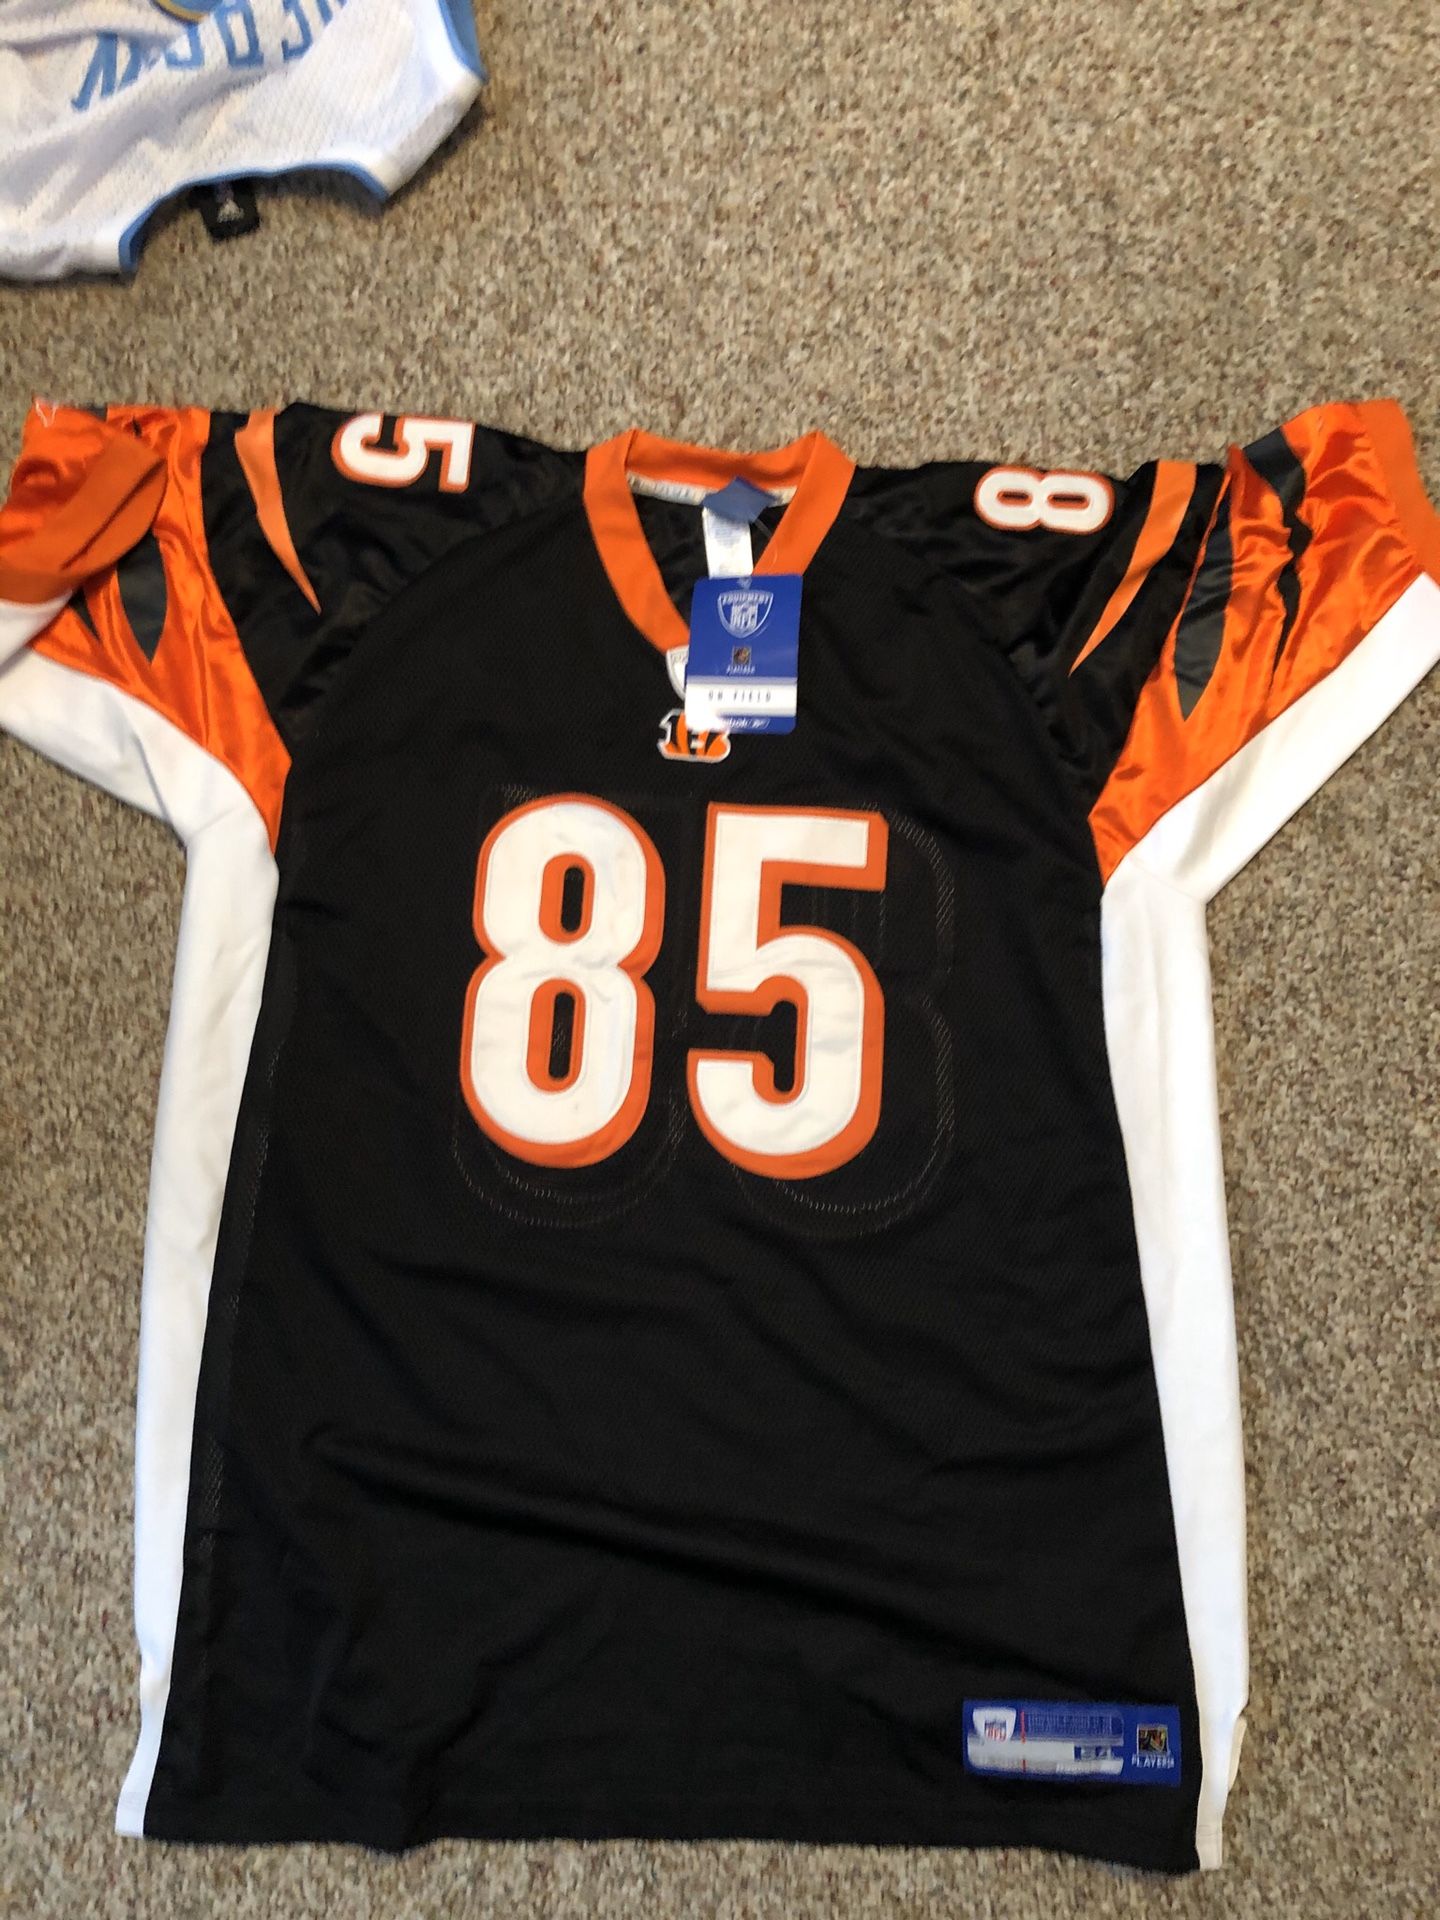 NFL AUTHENTIC JERSEY CHAD JOHNSON